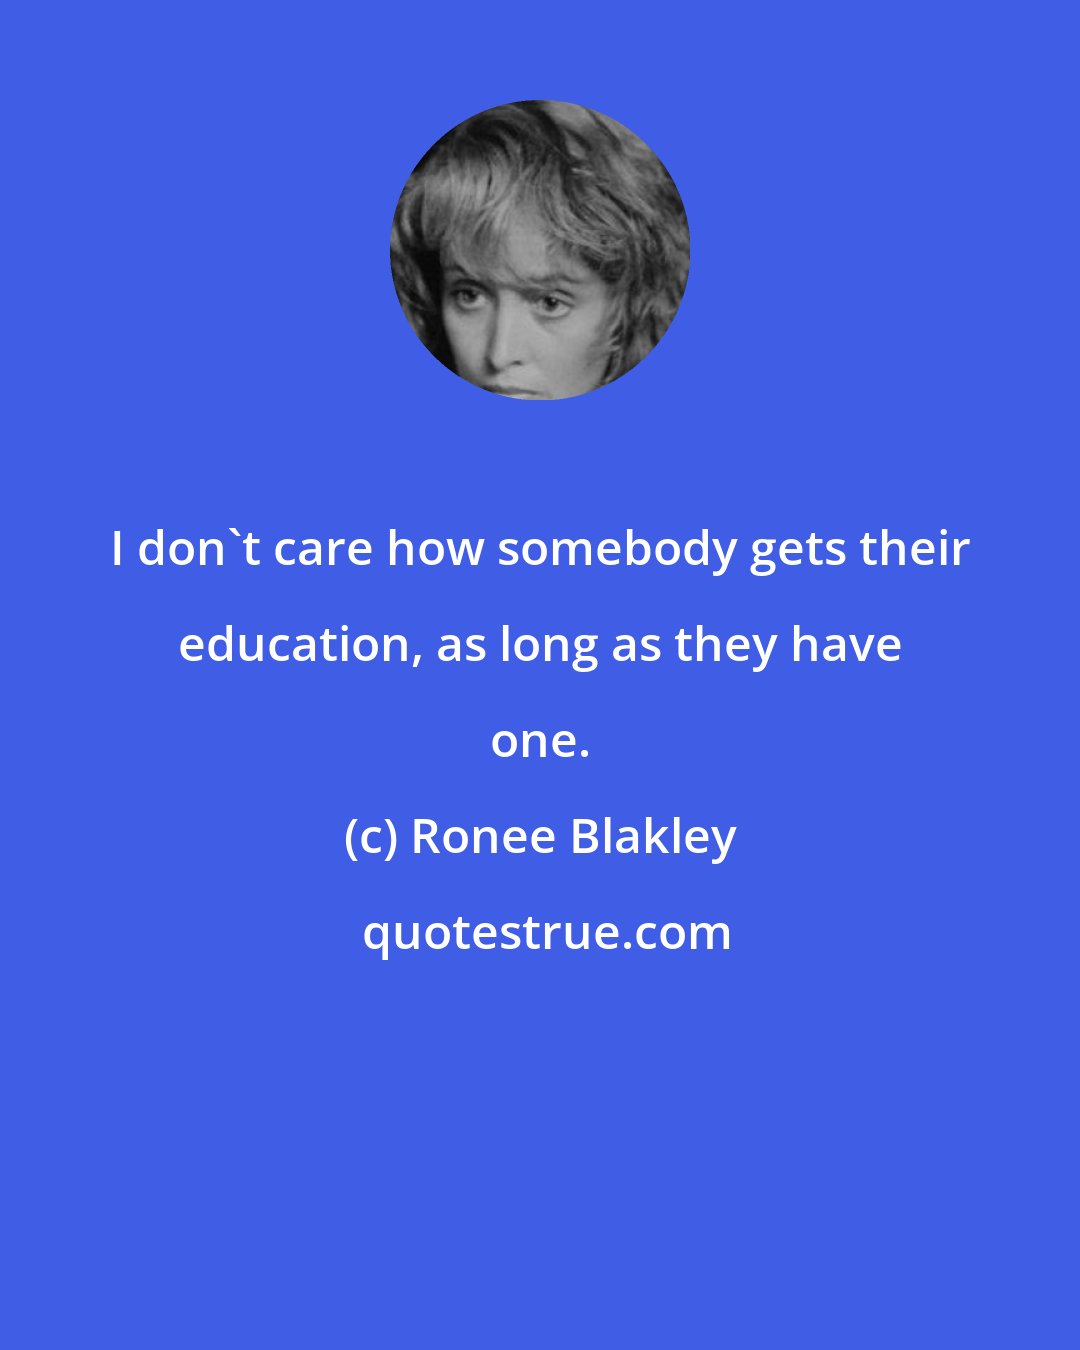 Ronee Blakley: I don't care how somebody gets their education, as long as they have one.